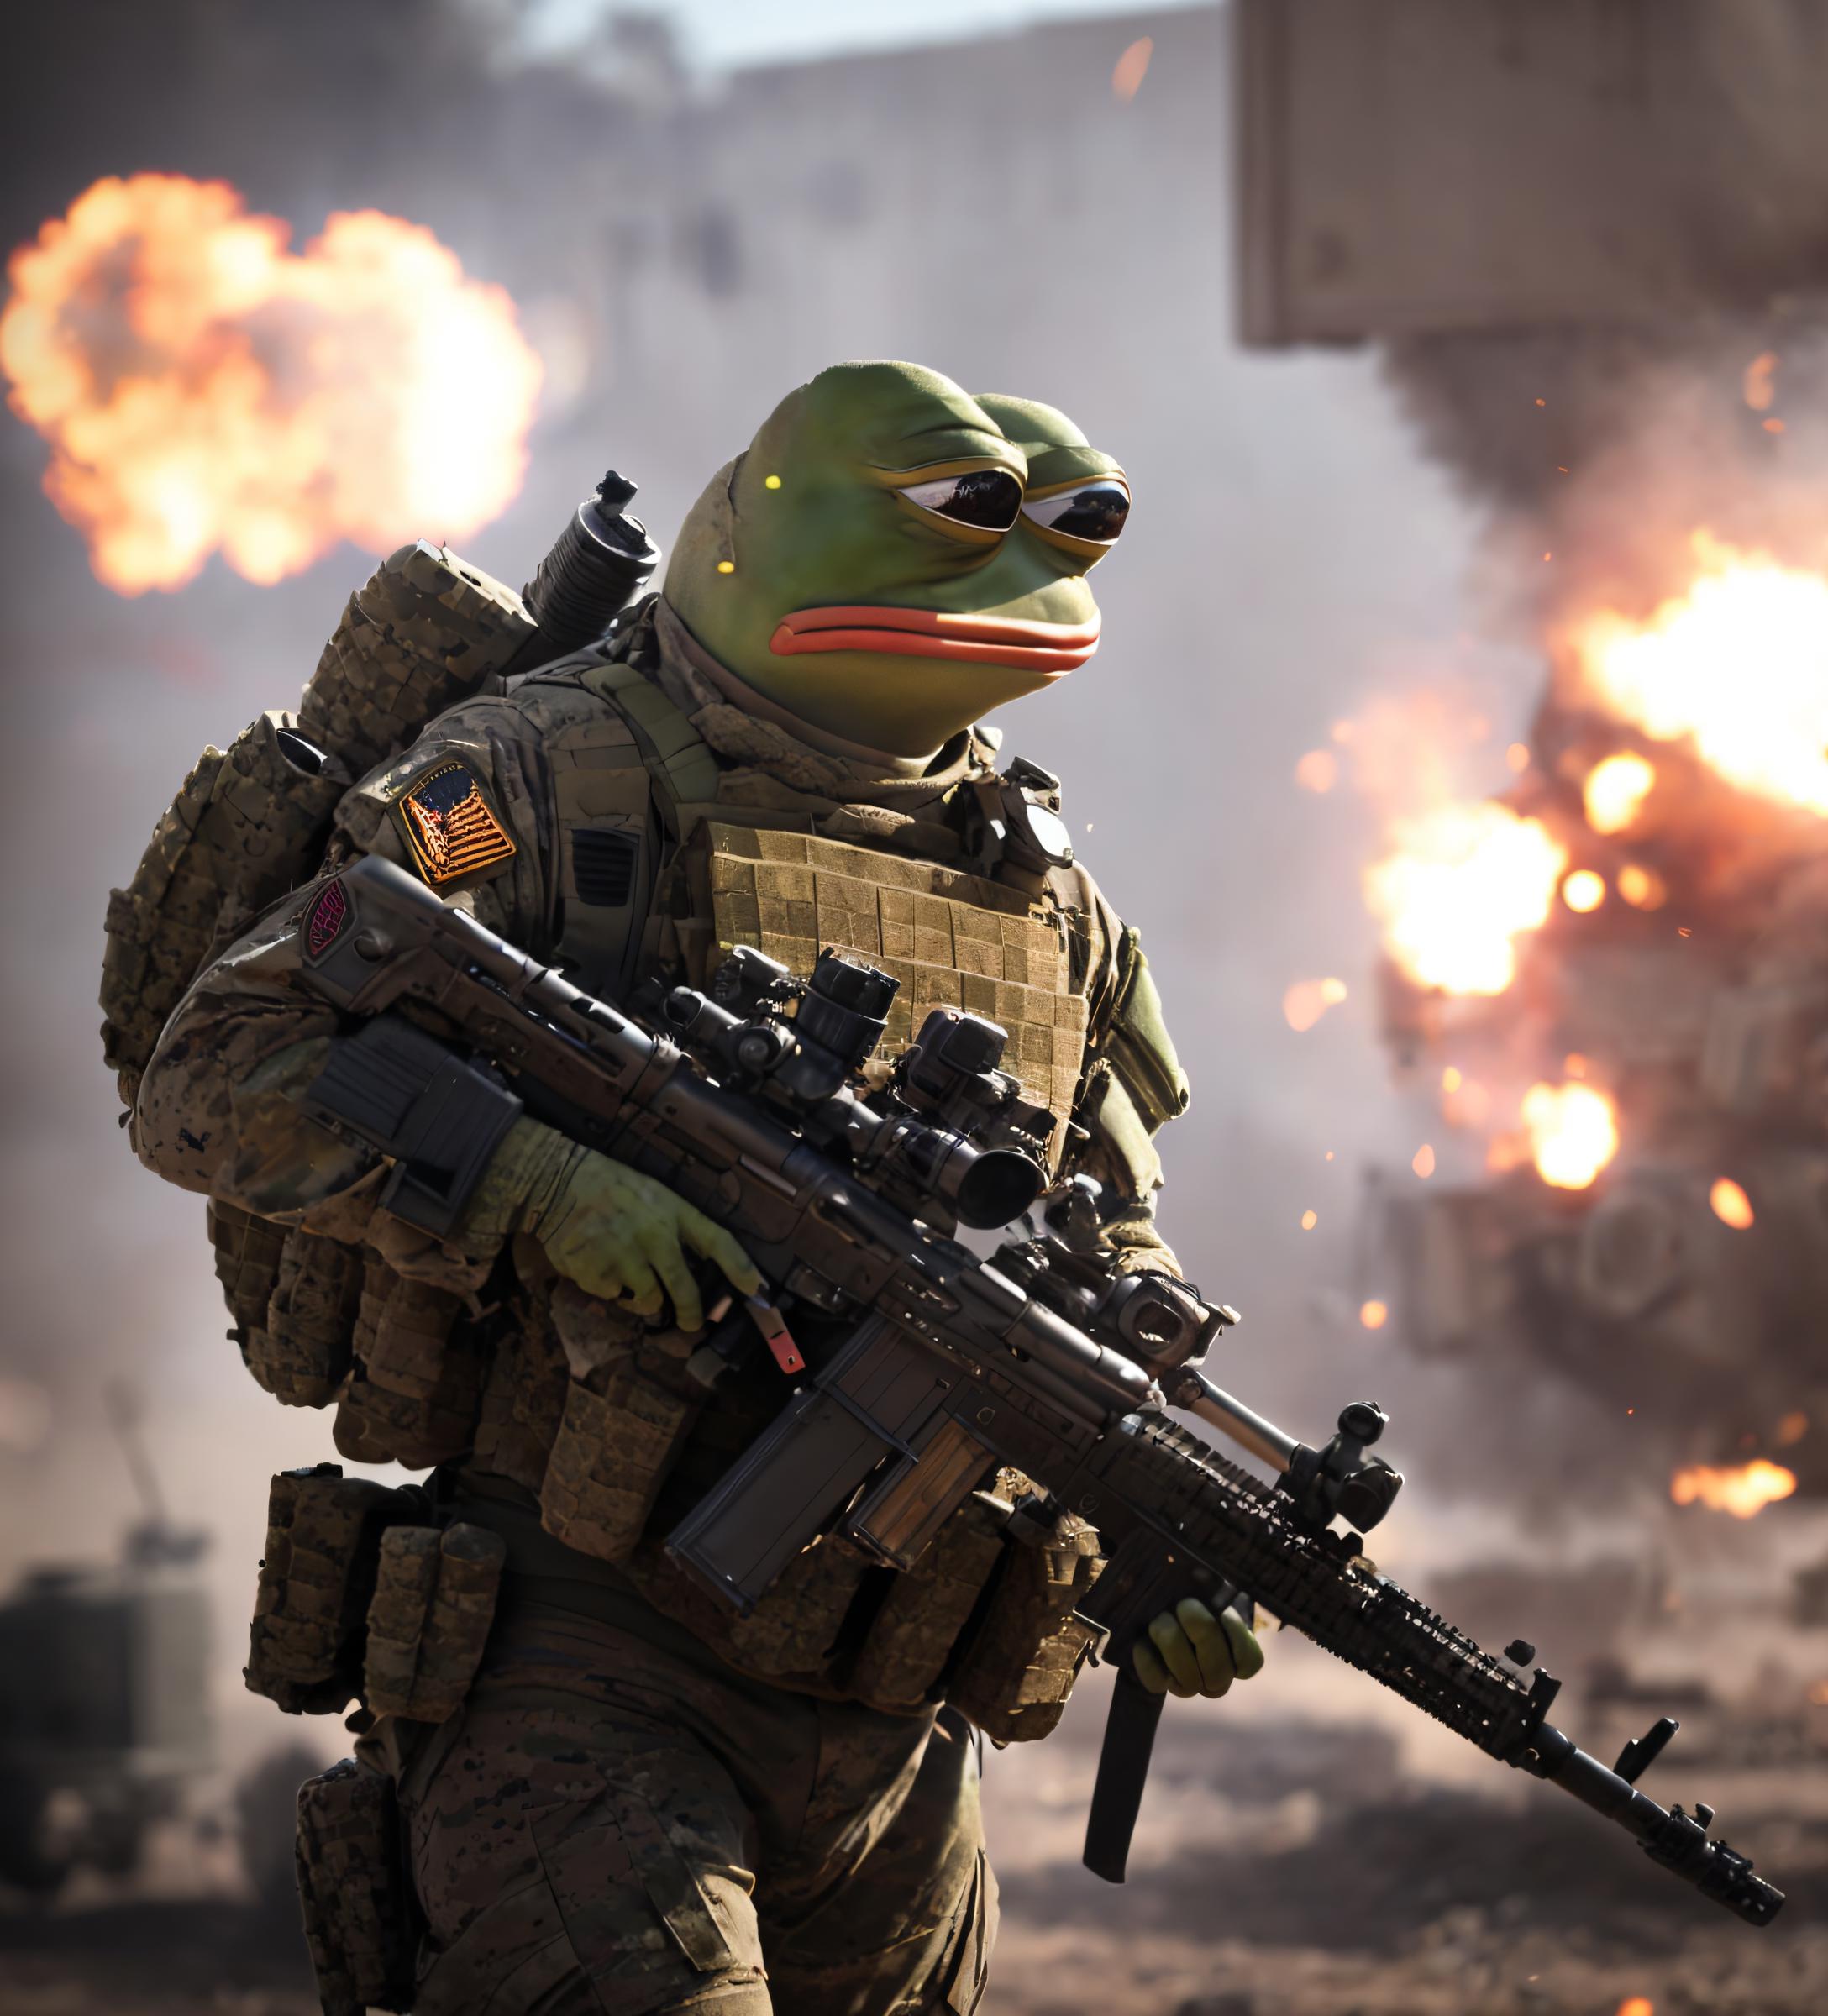 A soldier with a gun and a frog on his face.